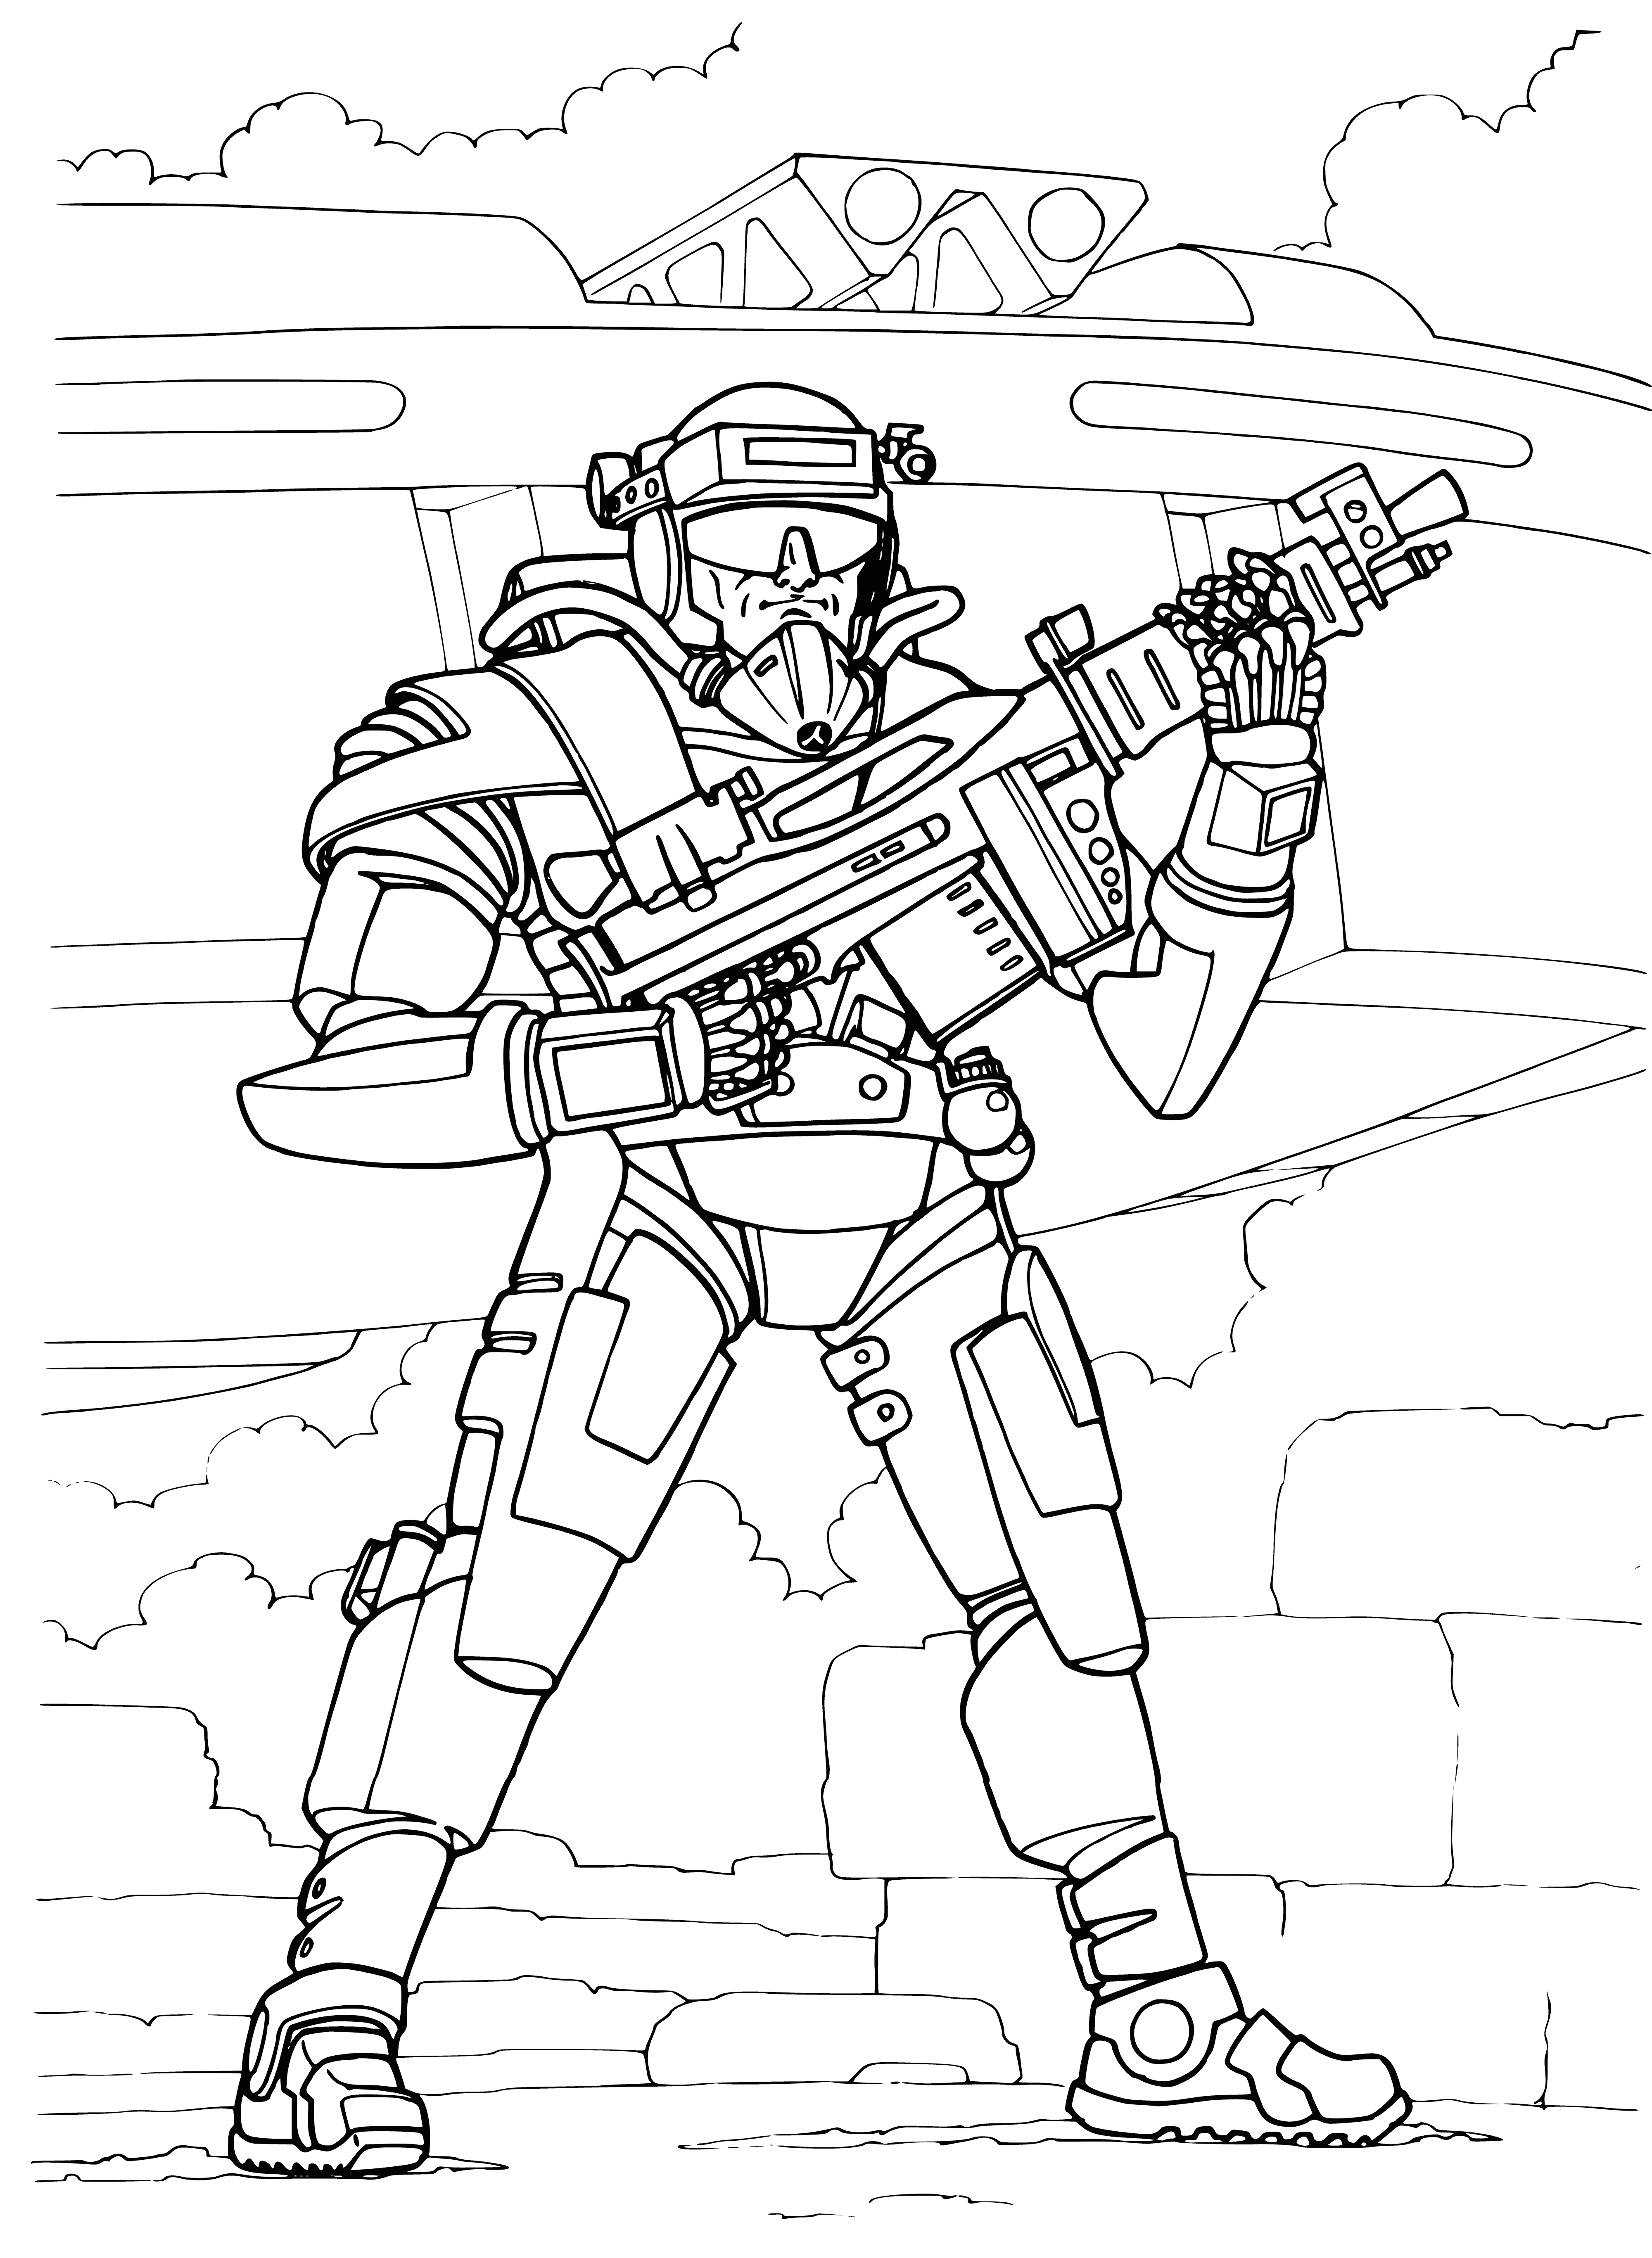 coloring page: A futuristic soldier equipped with helmet, full-body suit, rifle and backpack ready for battle.